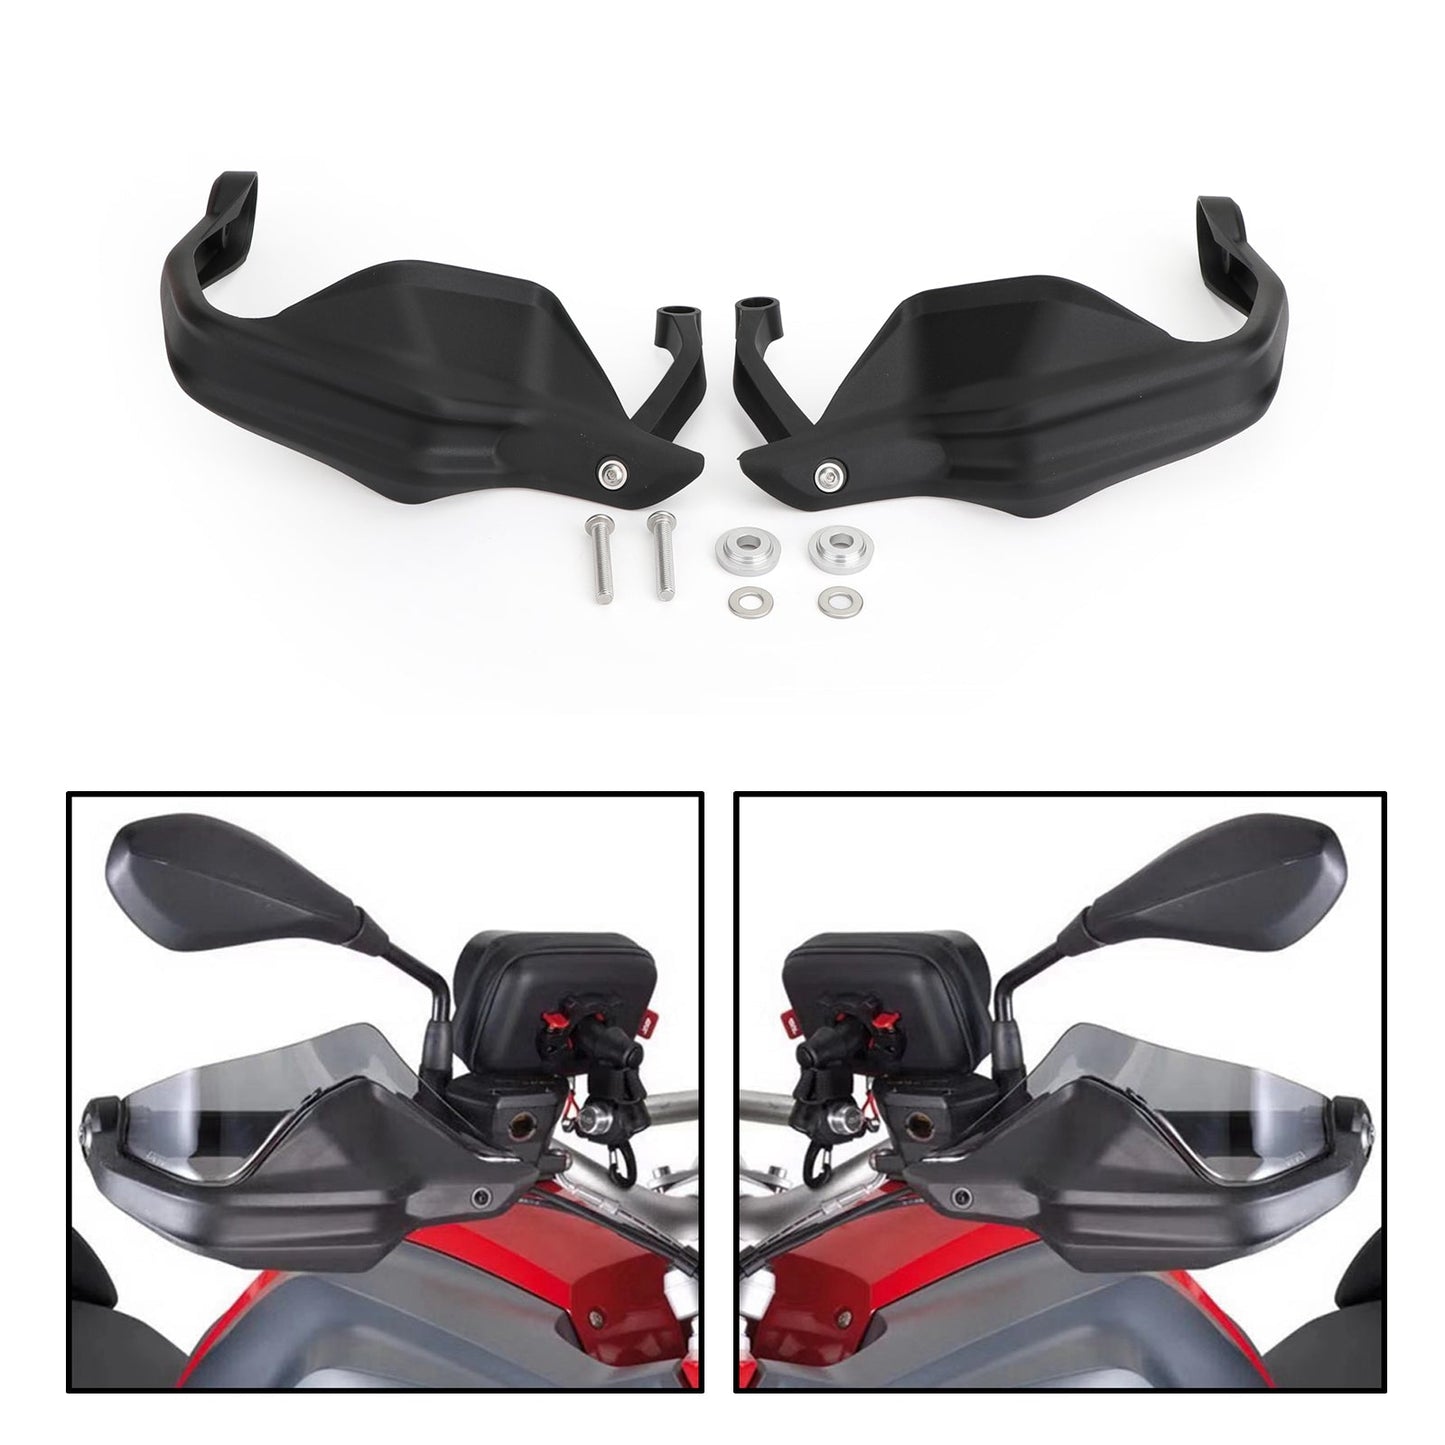 Motorcycle Protector Hand Guards fits for BMW G310GS/G310R 2017-2019 Handguard For BMW G310GS/G310R 2017-2019